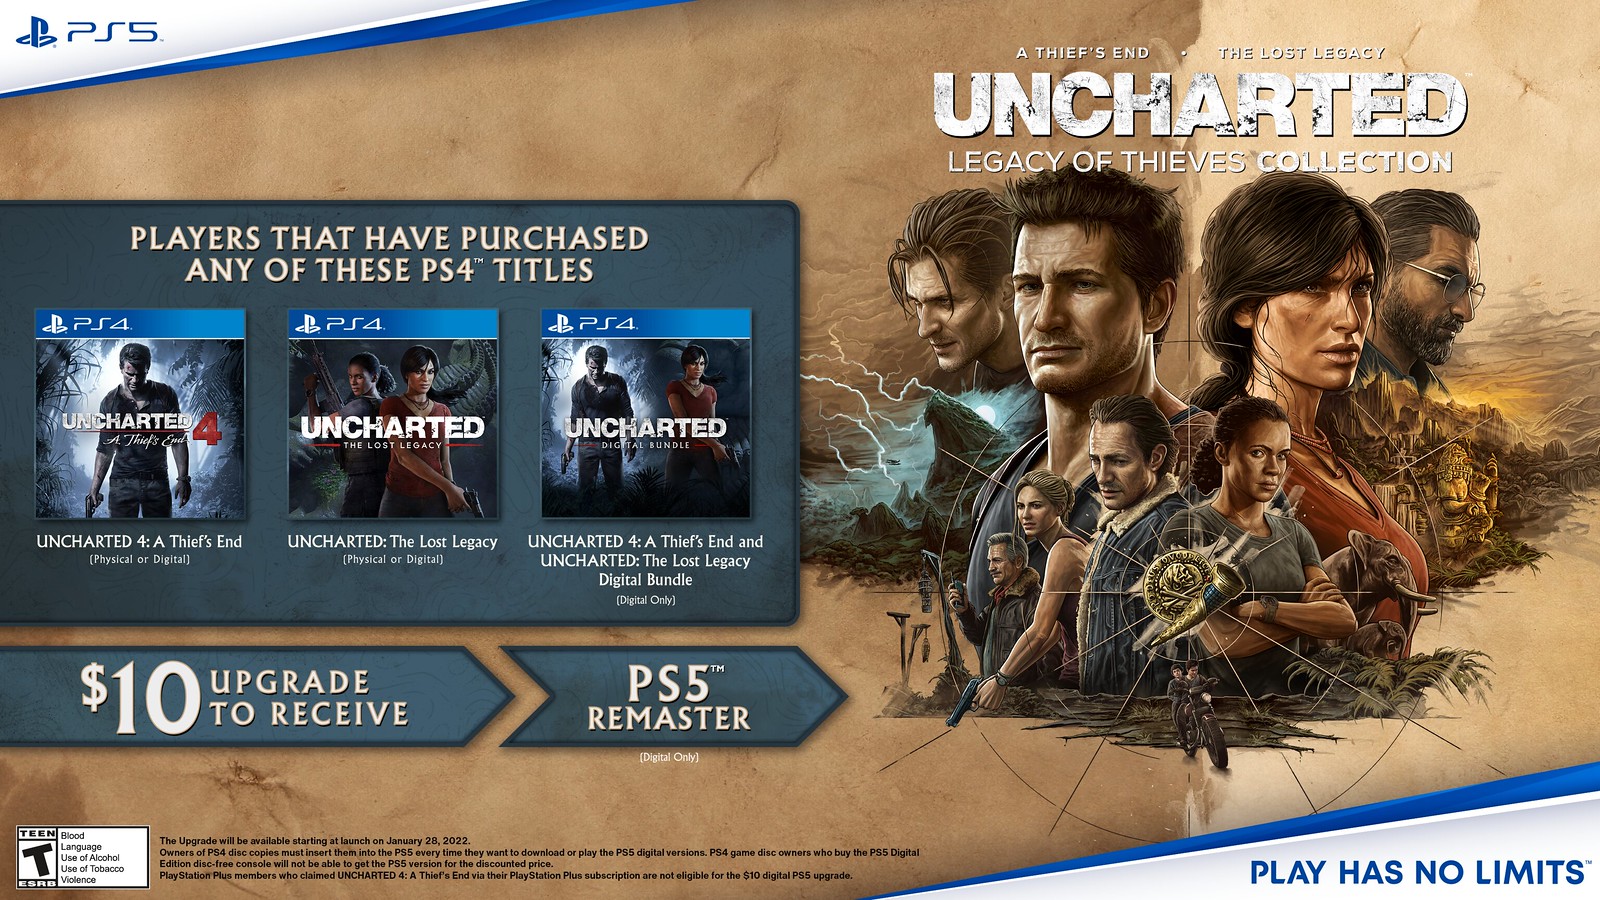 Uncharted: Legacy of Thieves Collection comes to Steam in 2022